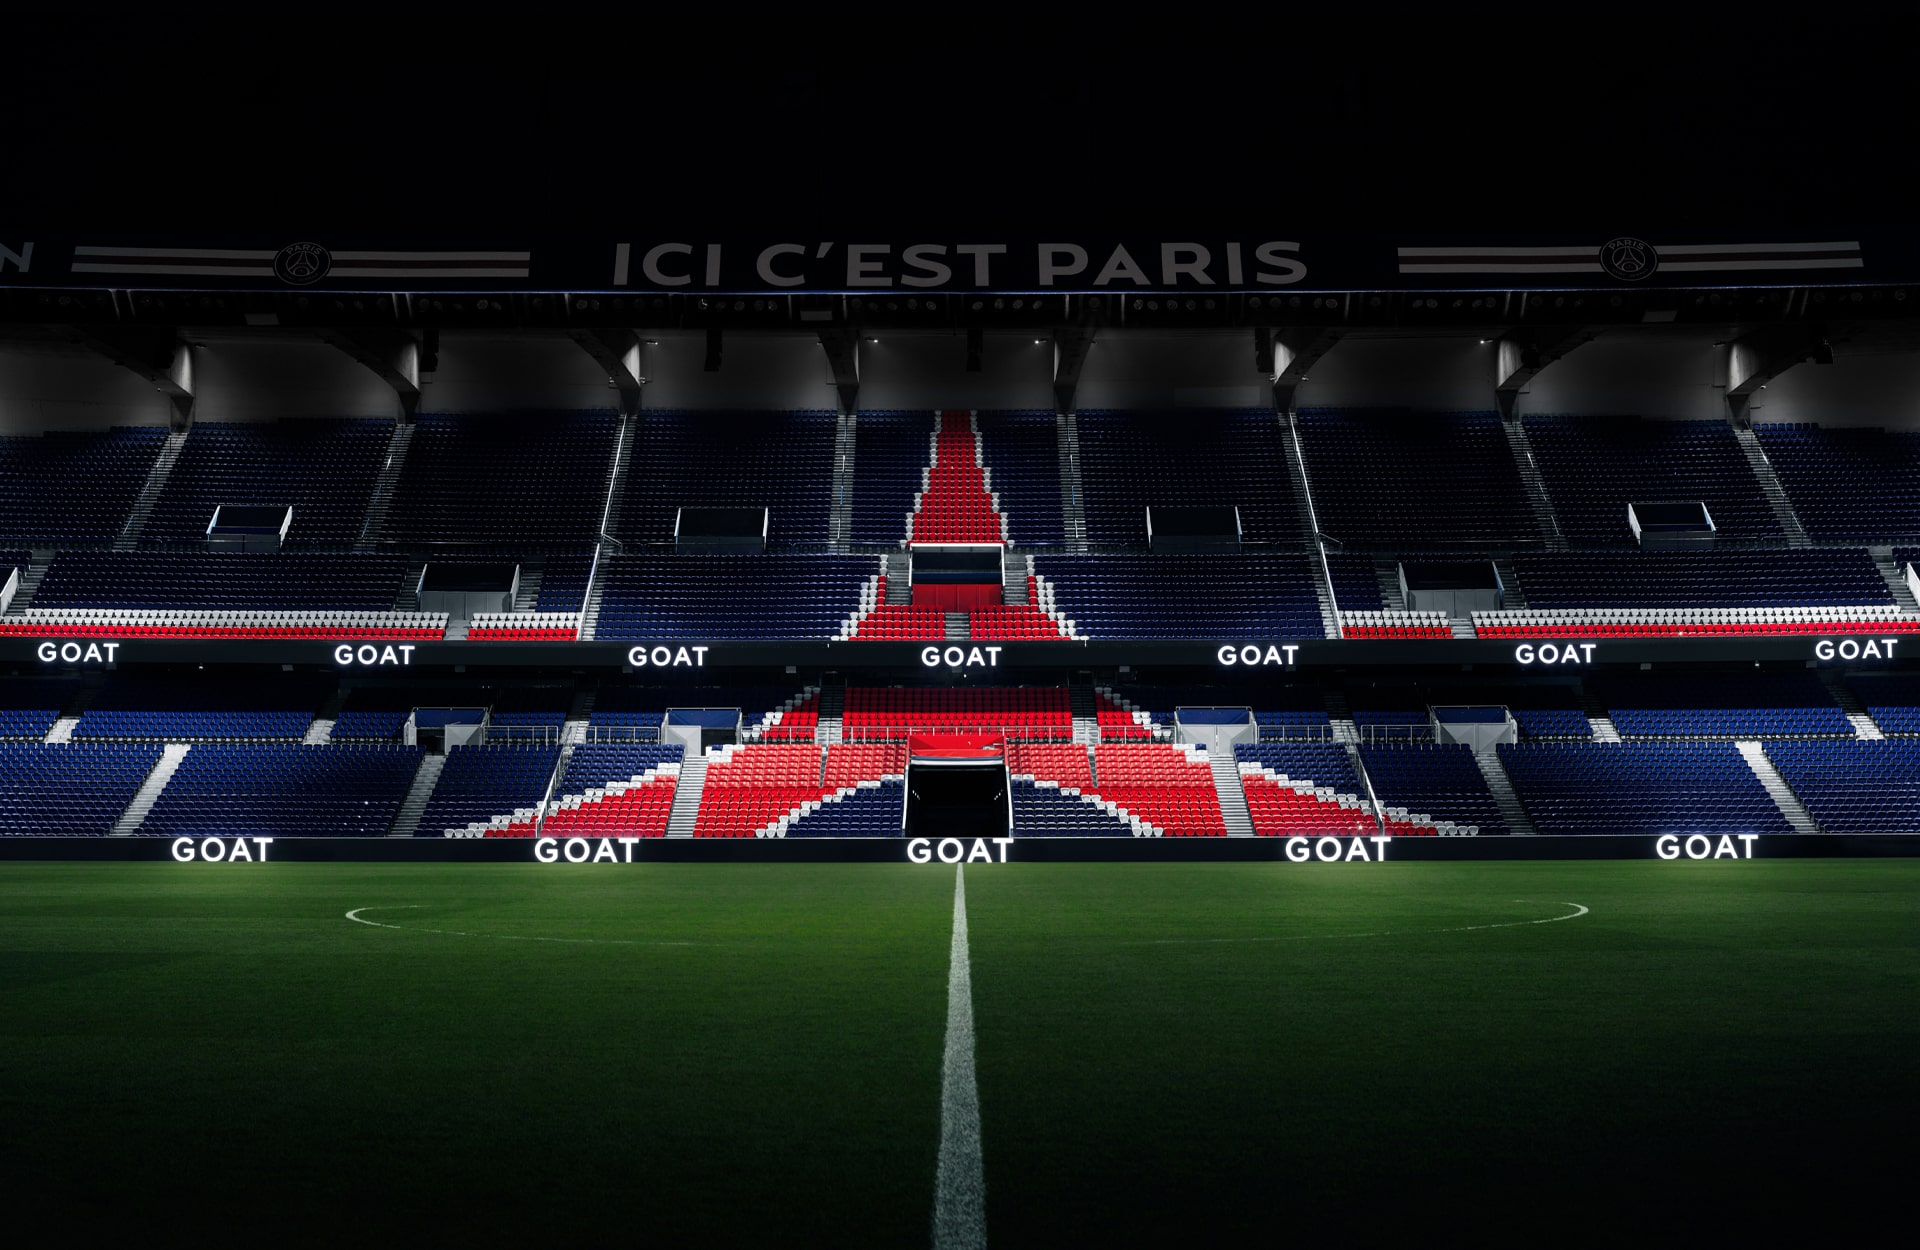 Paris Saint-Germain: Lionel Messi to wear 'GOAT' on his sleeve, PSG announce Partnership with GOAT as new 'Sleeve Sponsor' worth €50-million - Check details